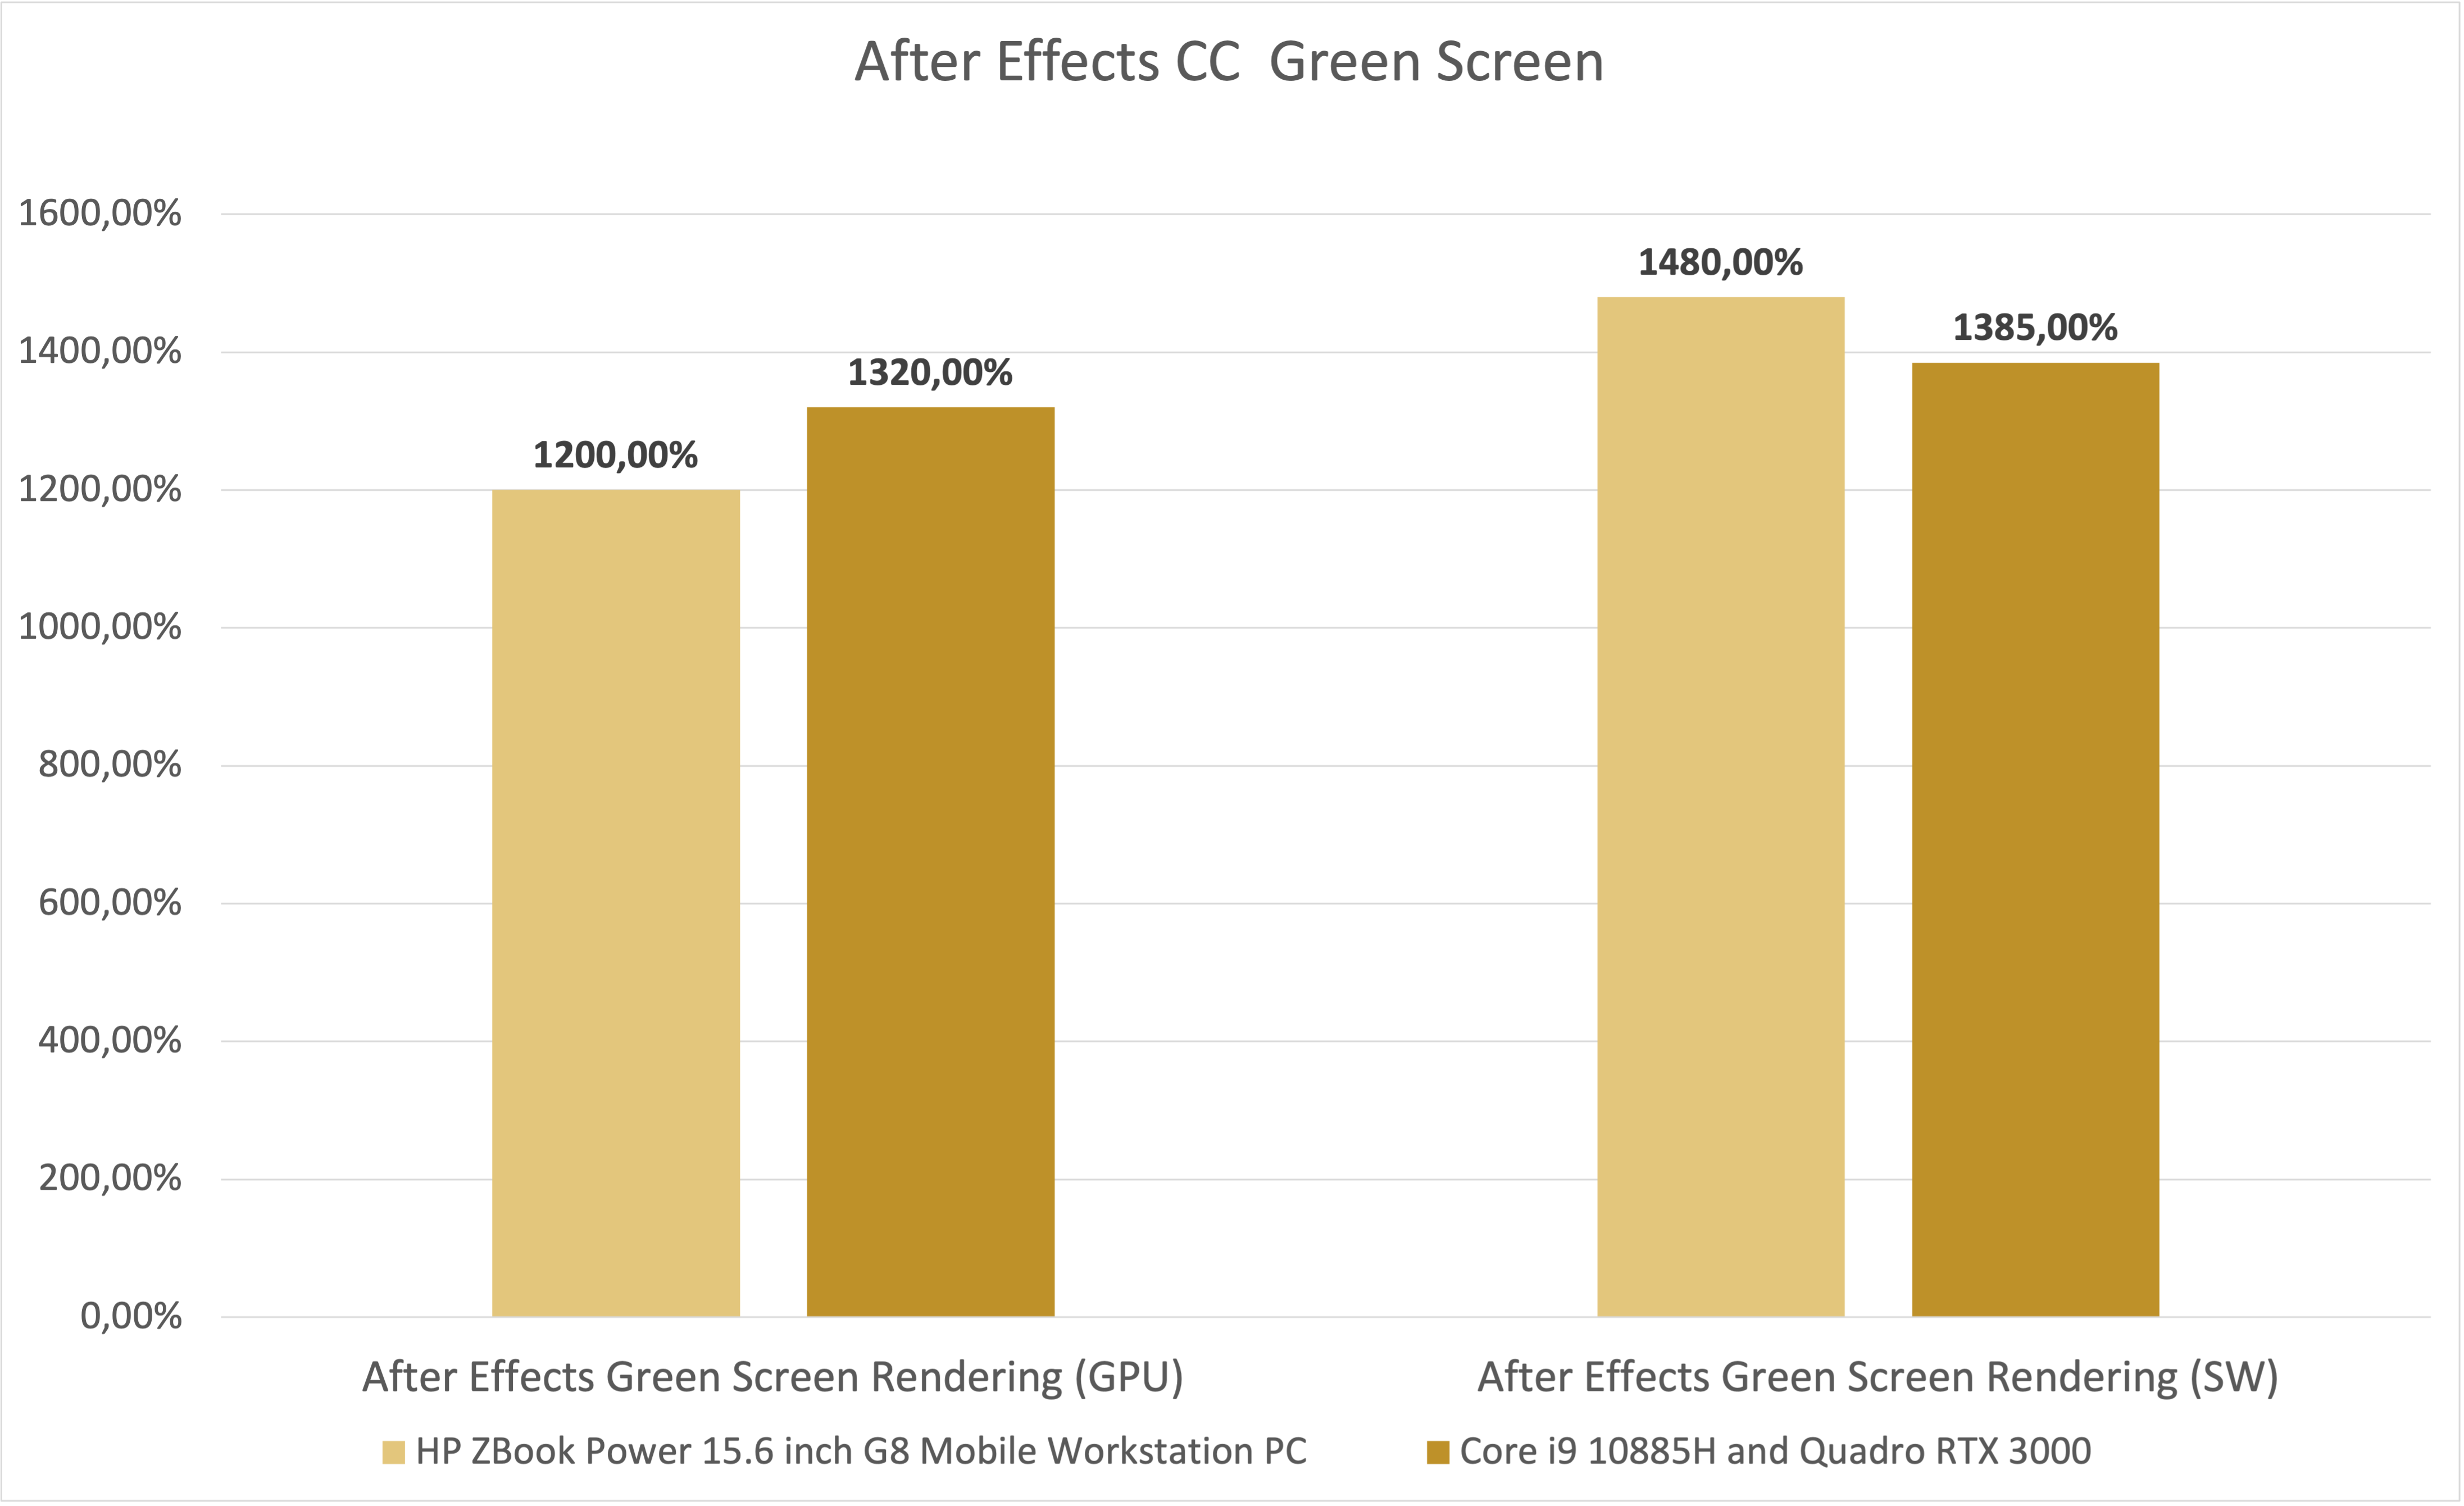 Whether GPU accelerated or software-only, this green screen project in After Effects is not significantly faster using GPU acceleration. The slight performance edge shown by the ZBook Power could be the result of Adobe optimizations in After Effects.